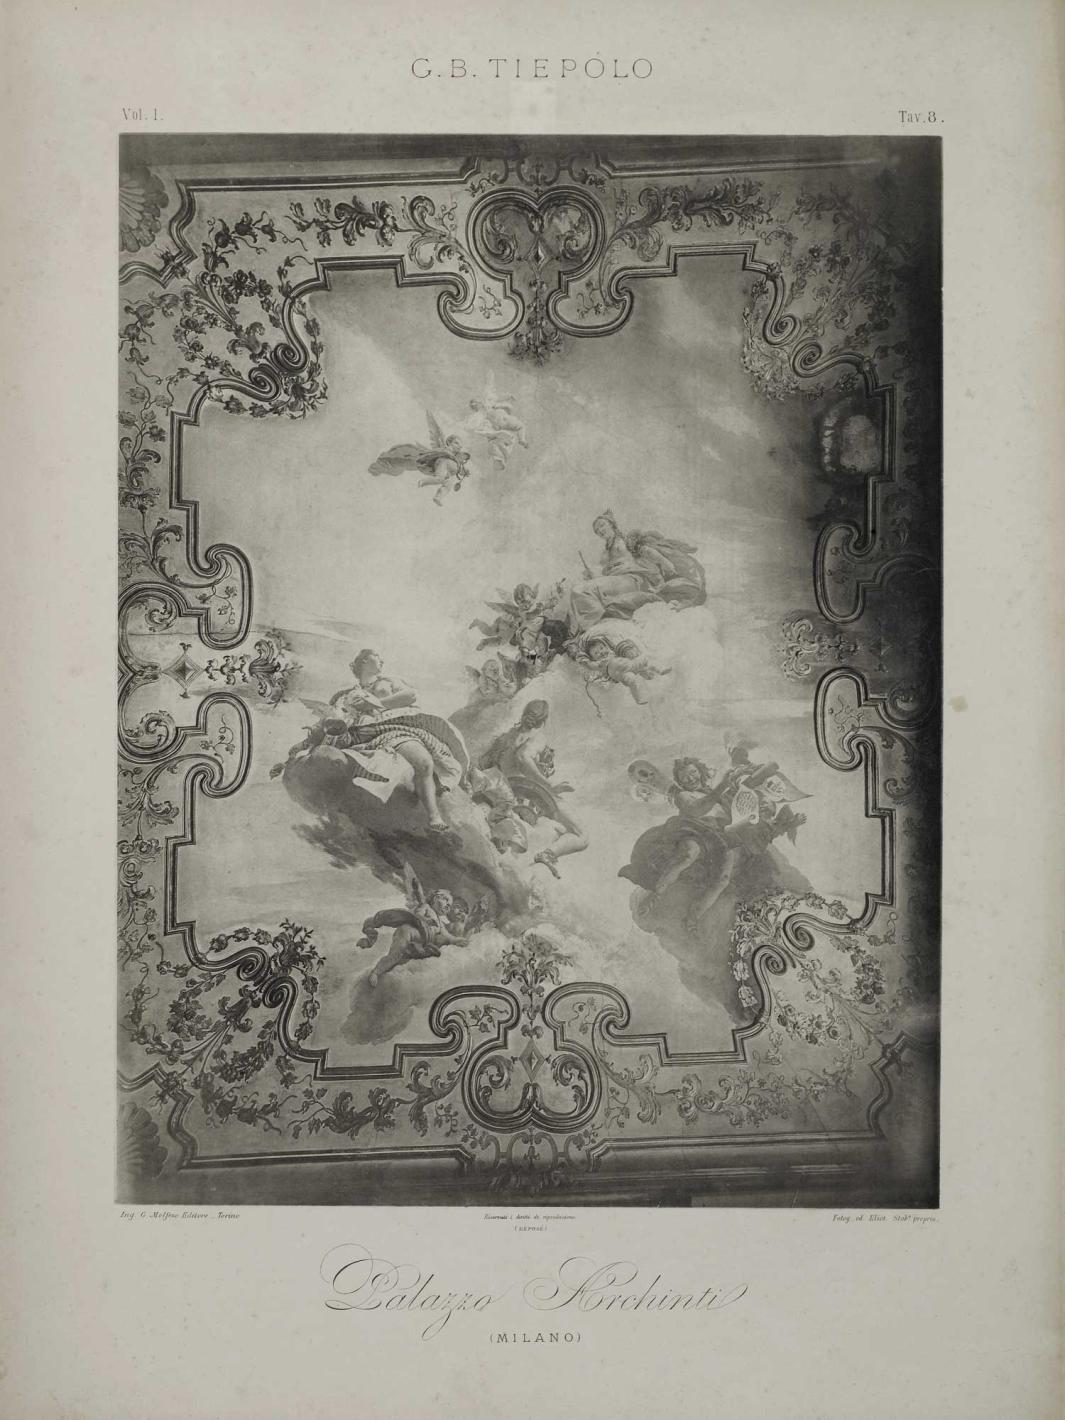 Photograph of a frescoed ceiling.